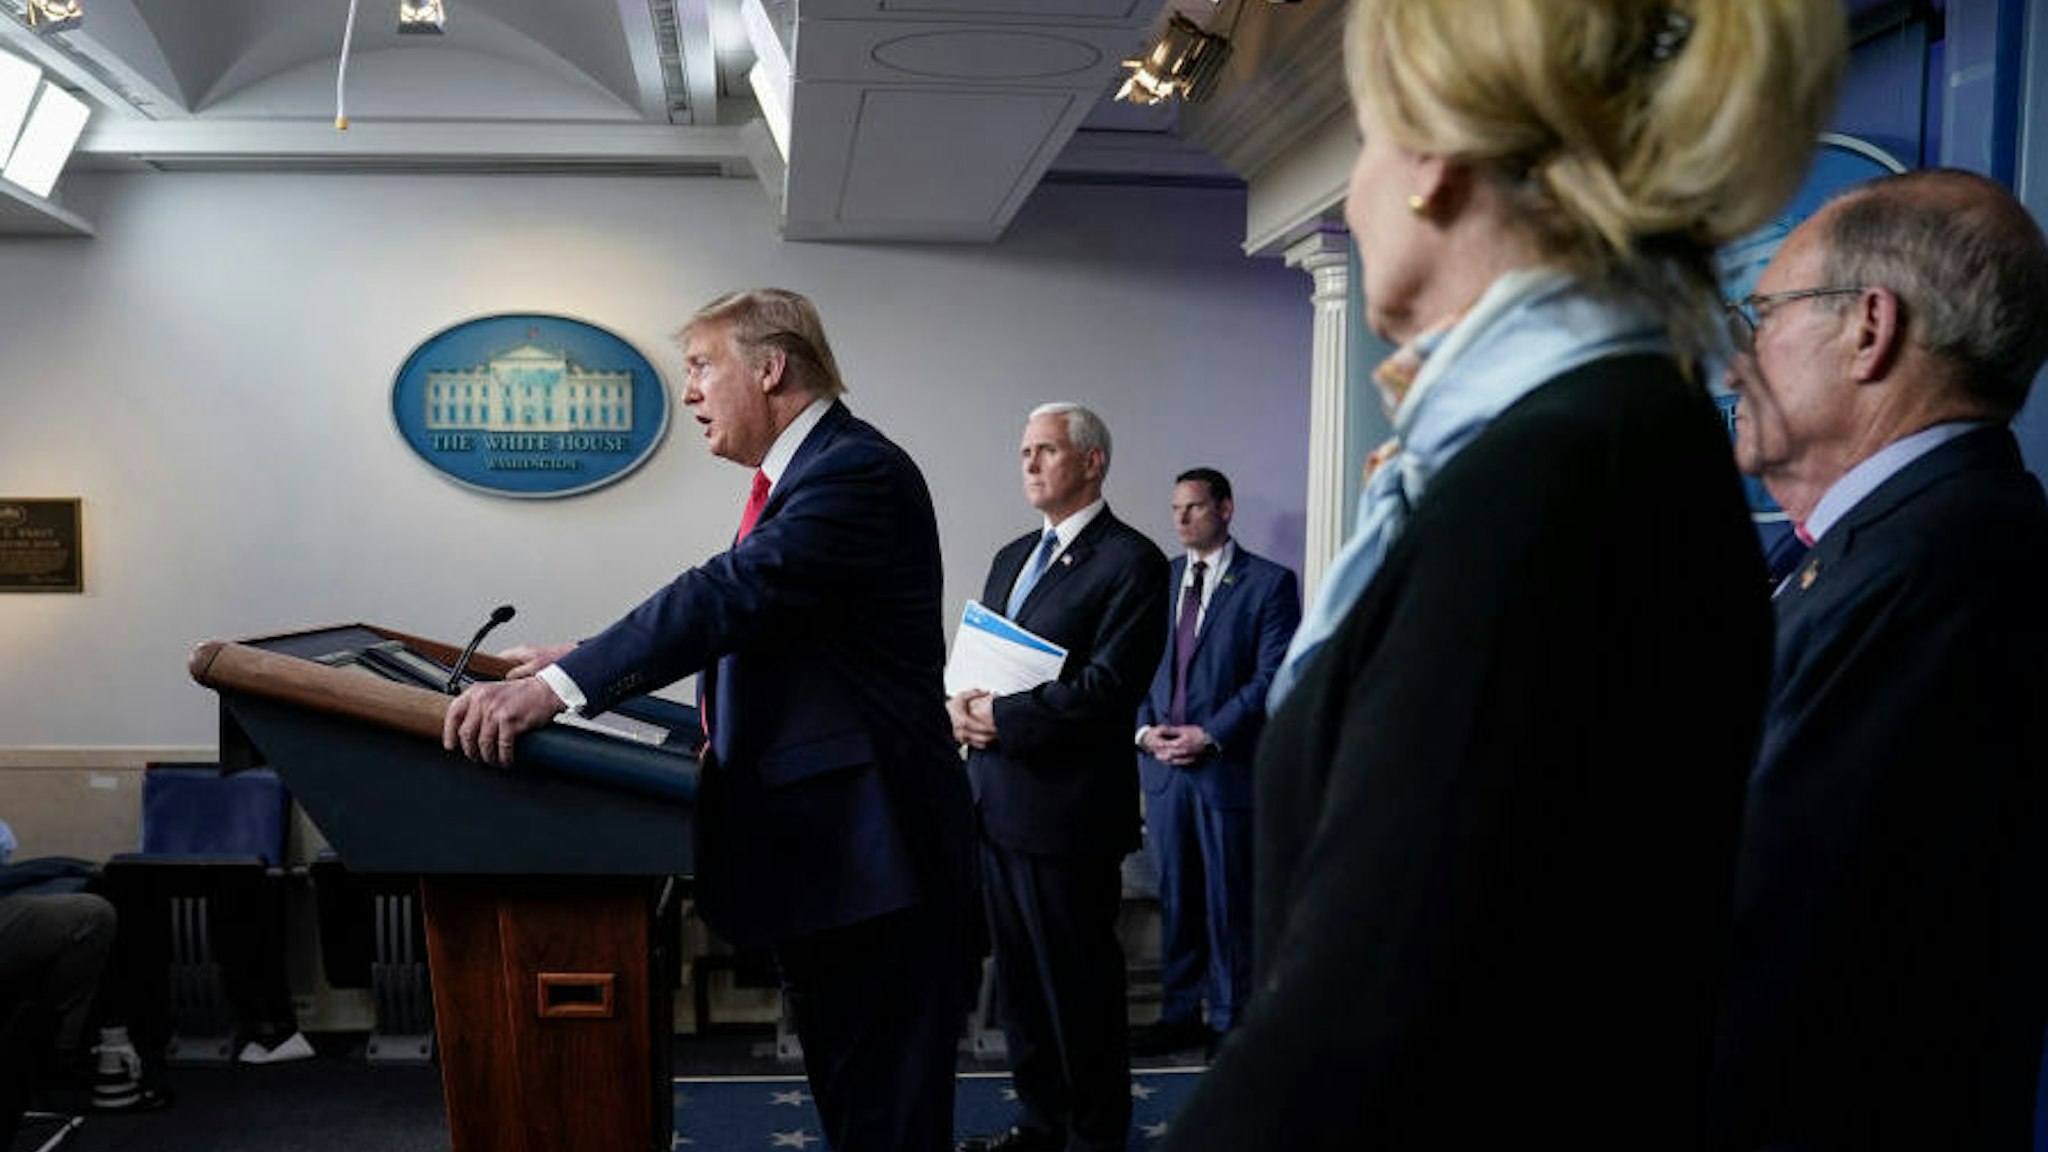 U.S. President Donald Trump speaks during a briefing on the coronavirus pandemic, in the press briefing room of the White House on March 24, 2020 in Washington, DC. Cases of COVID-19 continue to rise in the United States, with New York’s case count doubling every three days according to governor Andrew Cuomo. (Photo by Drew Angerer/Getty Images)